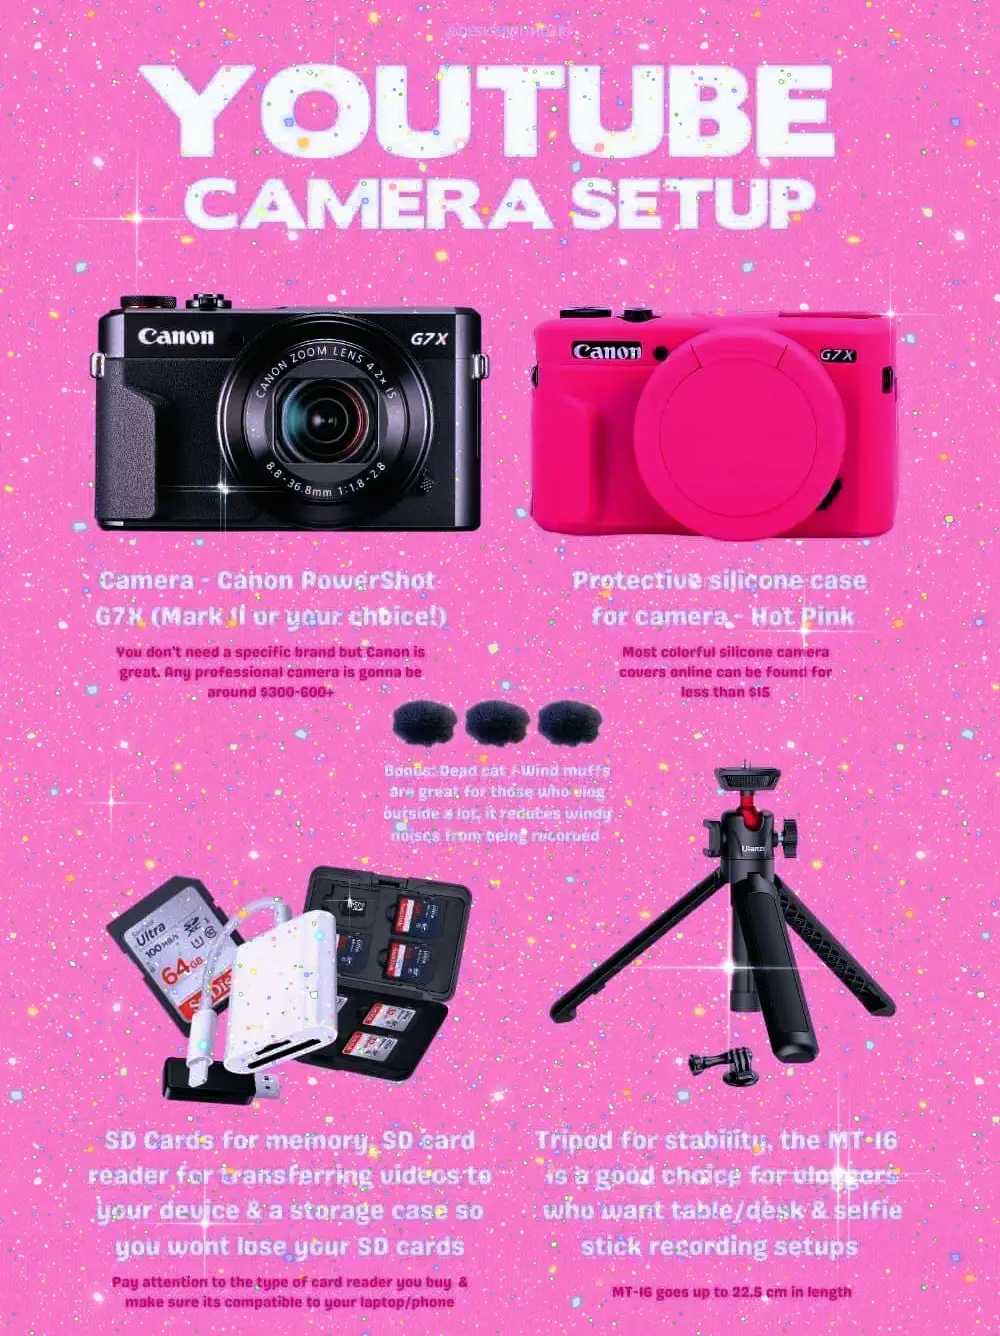 Hi! I am planning to sell my Canon g7x mark ii and buy the Canon EOS m200.  Would it bw a worthy upgrade considering the latter is cheaper than the g7x?  